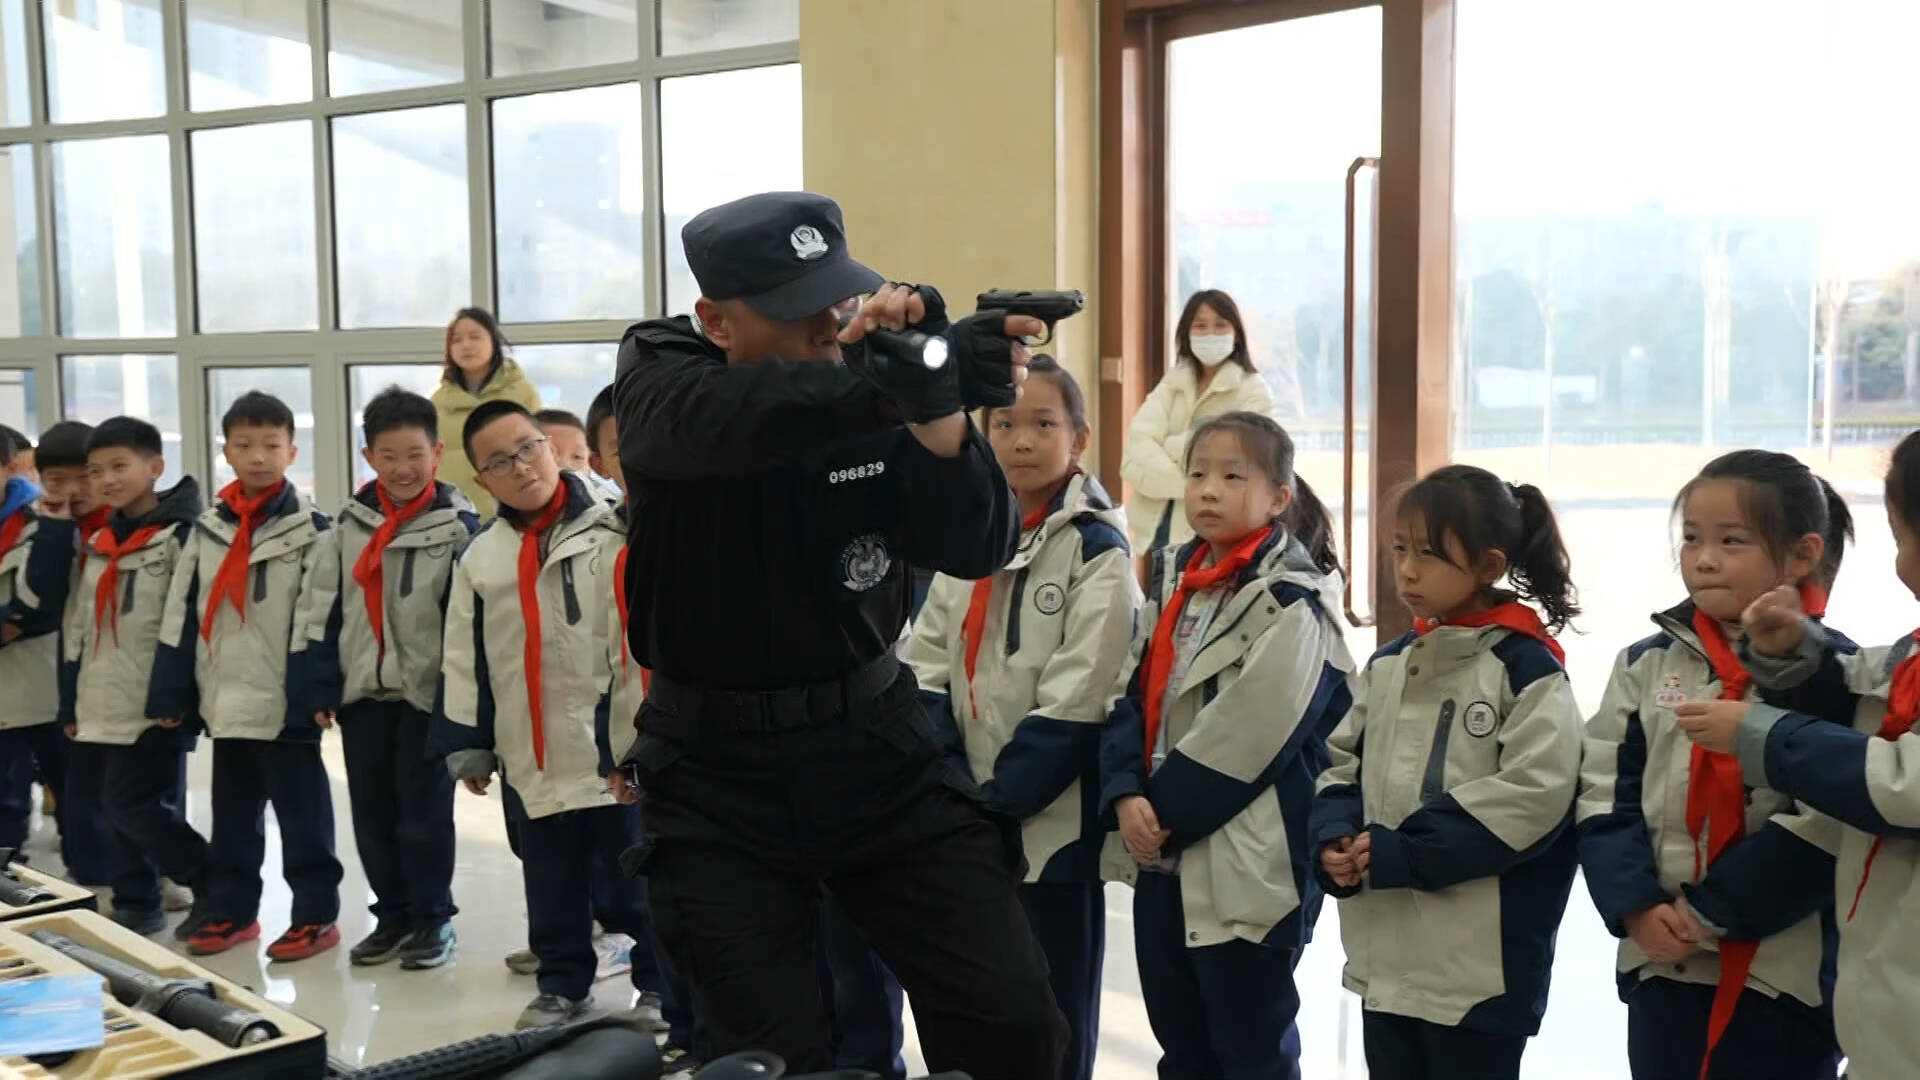  The "Police Camp Open Day" activity was held in many places in Shandong Province, with heavy array, weapons display and anti fraud propaganda